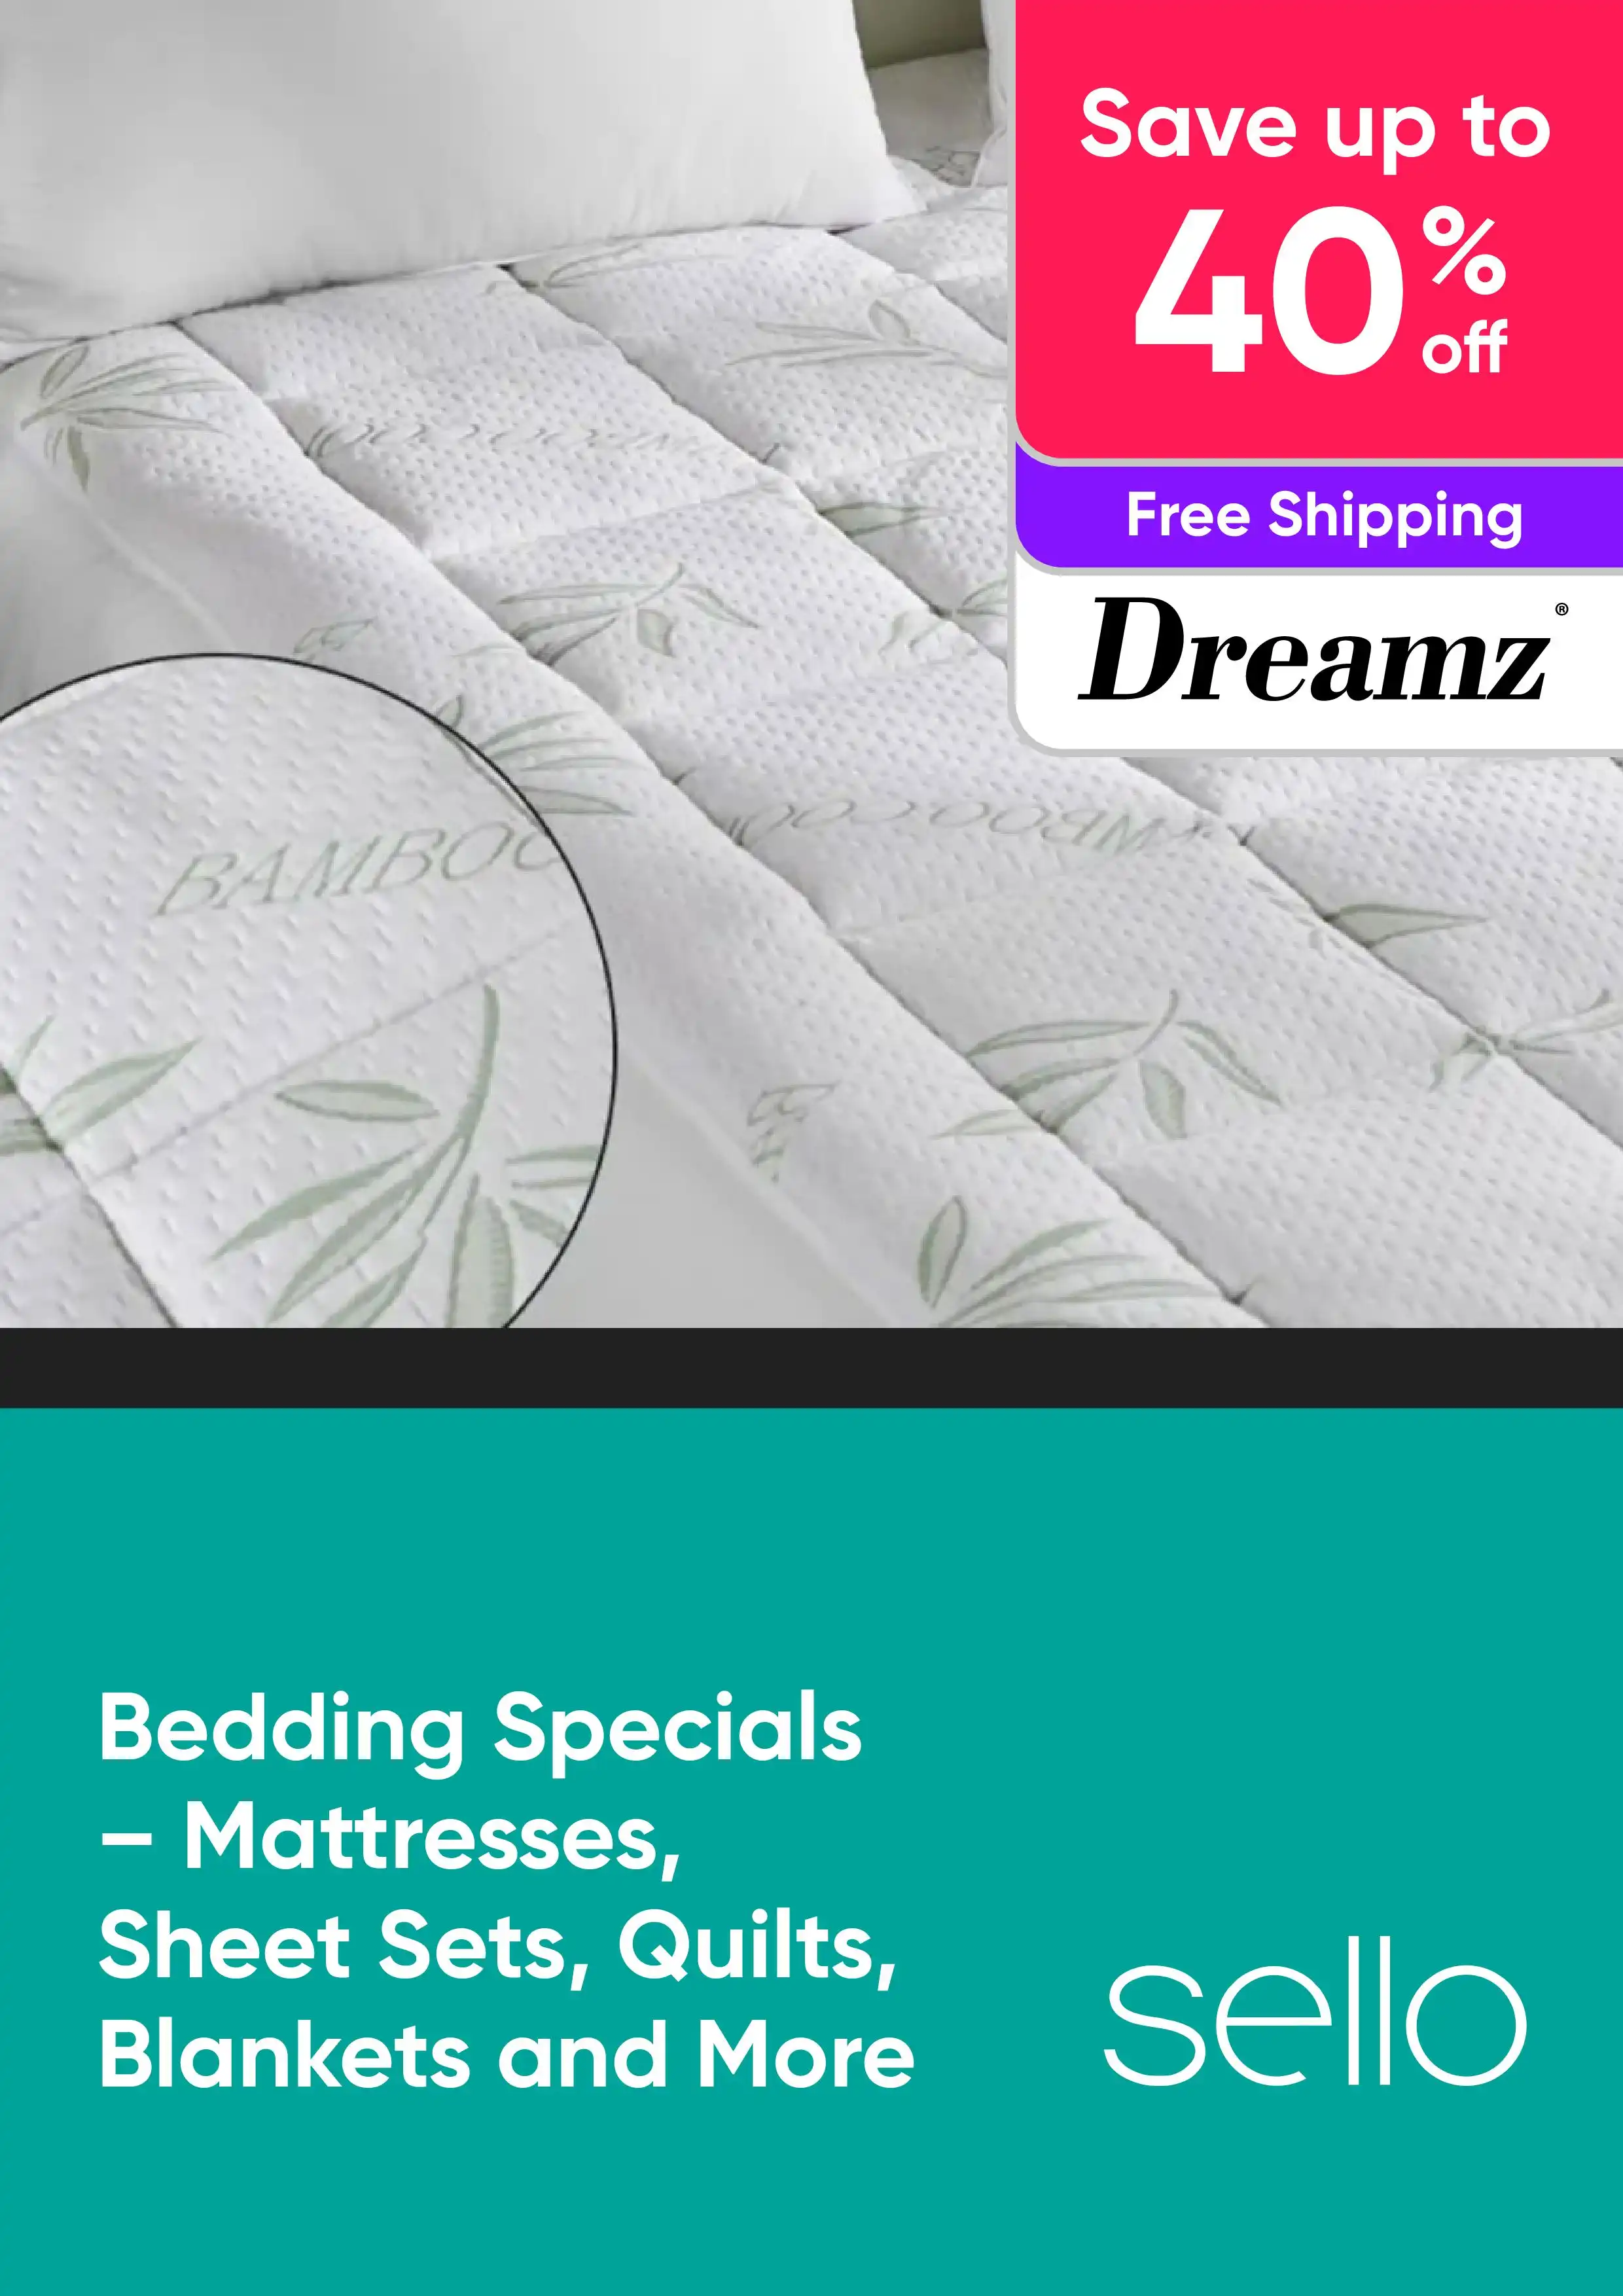 Bedding Specials - Mattresses, Sheet Sets, Quilts, Blankets and More - Dreamz - Up to 40% Off